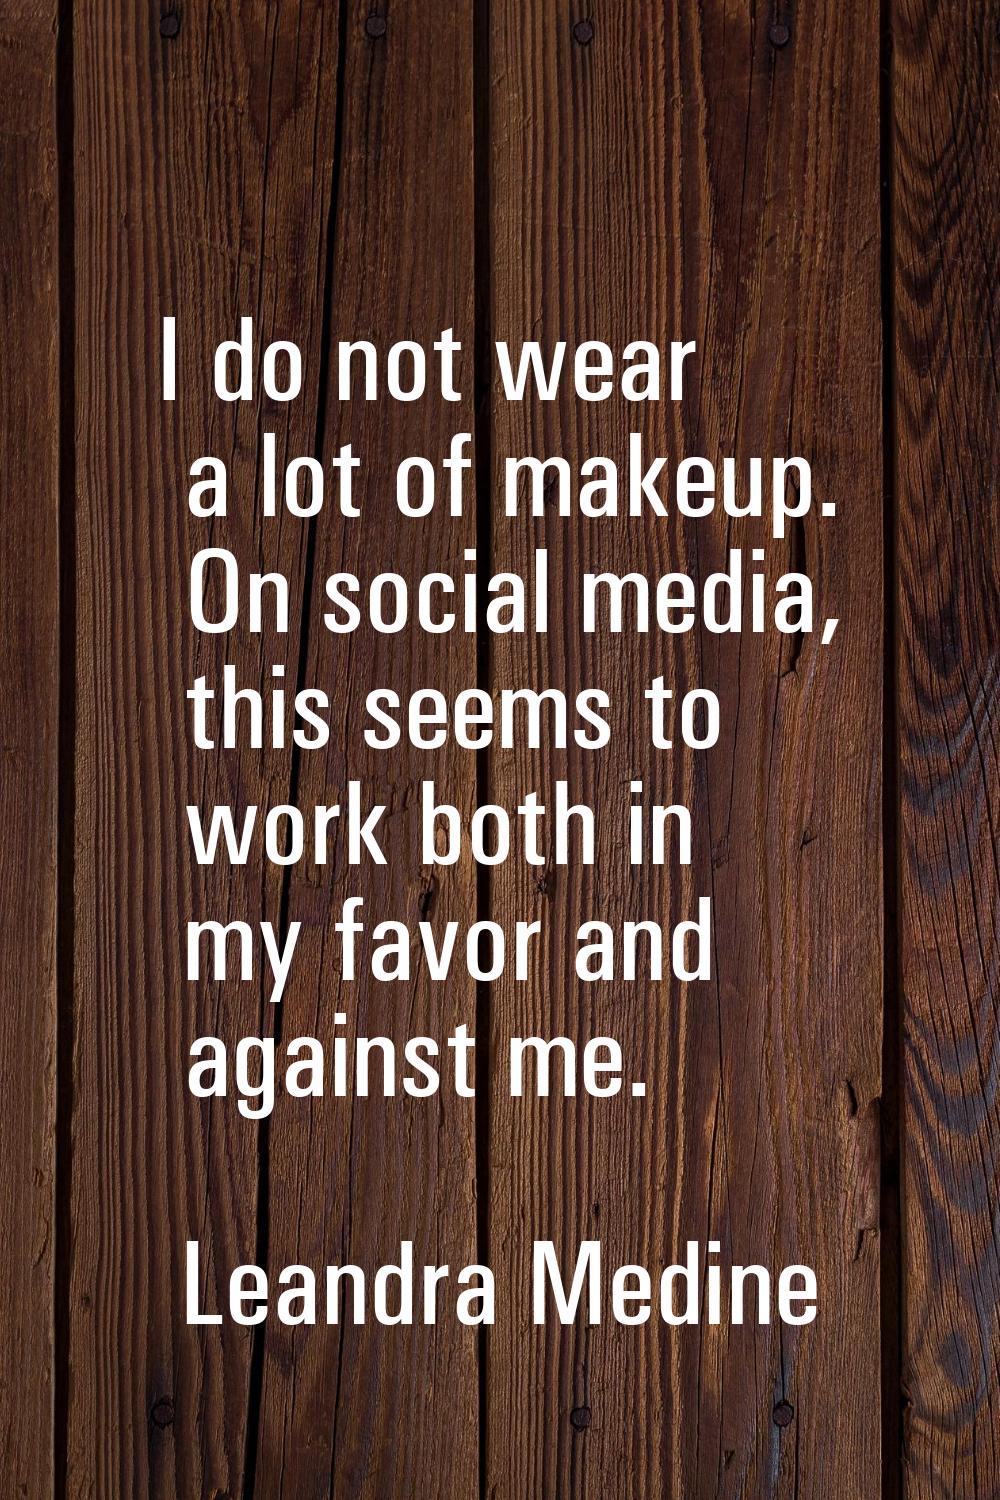 I do not wear a lot of makeup. On social media, this seems to work both in my favor and against me.